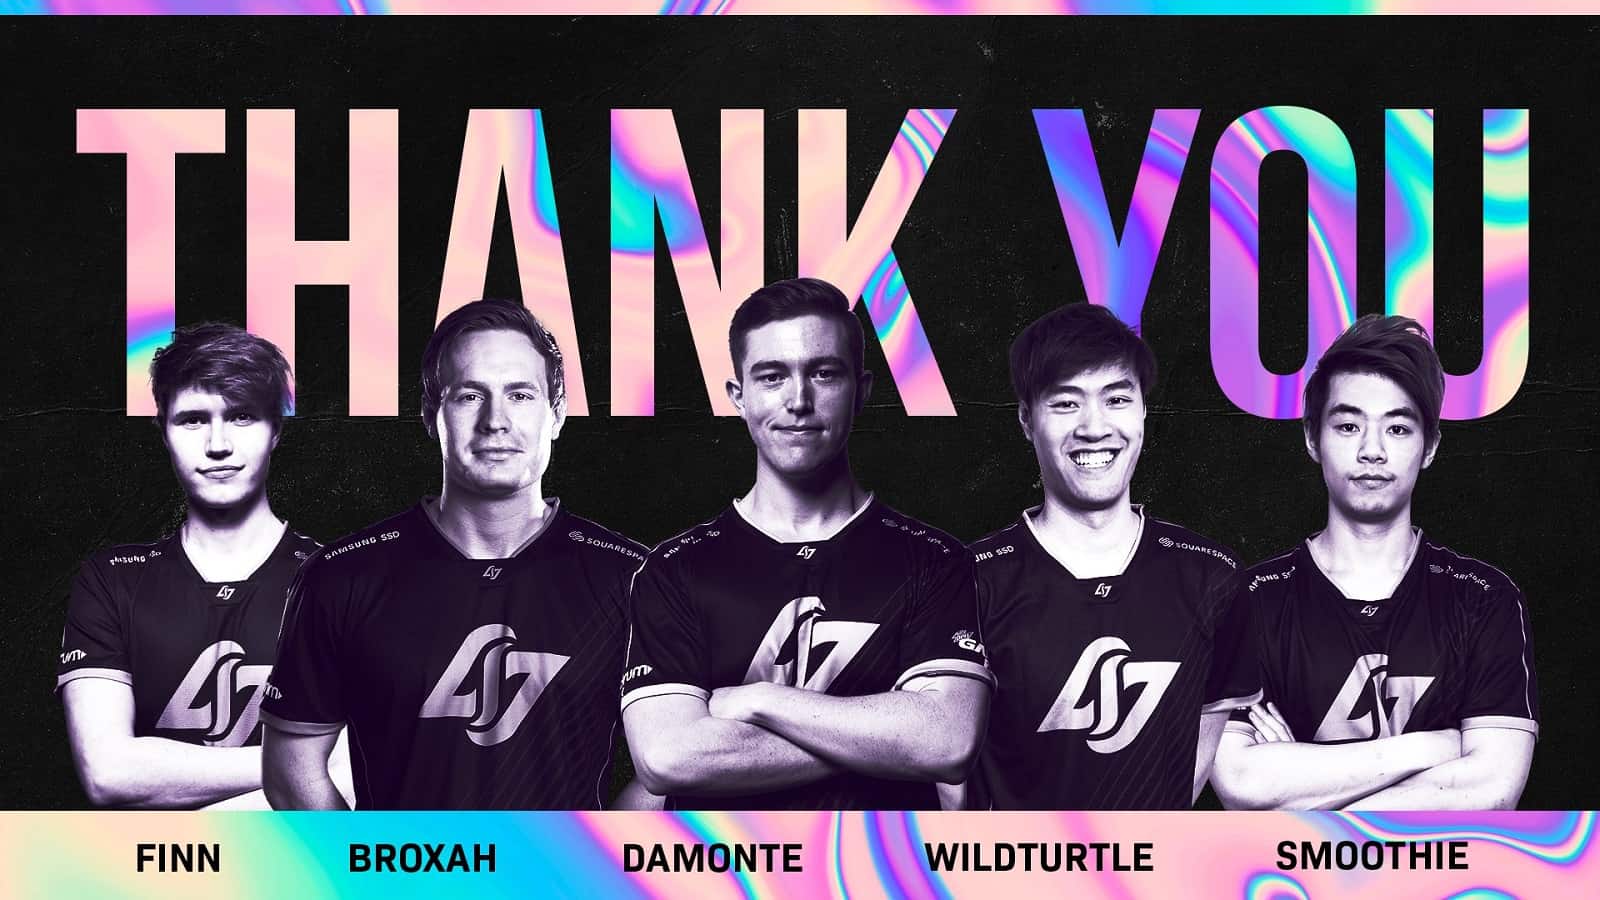 LoL: CLG Drops Entire LCS Roster, Looks To Start Fresh For 2022